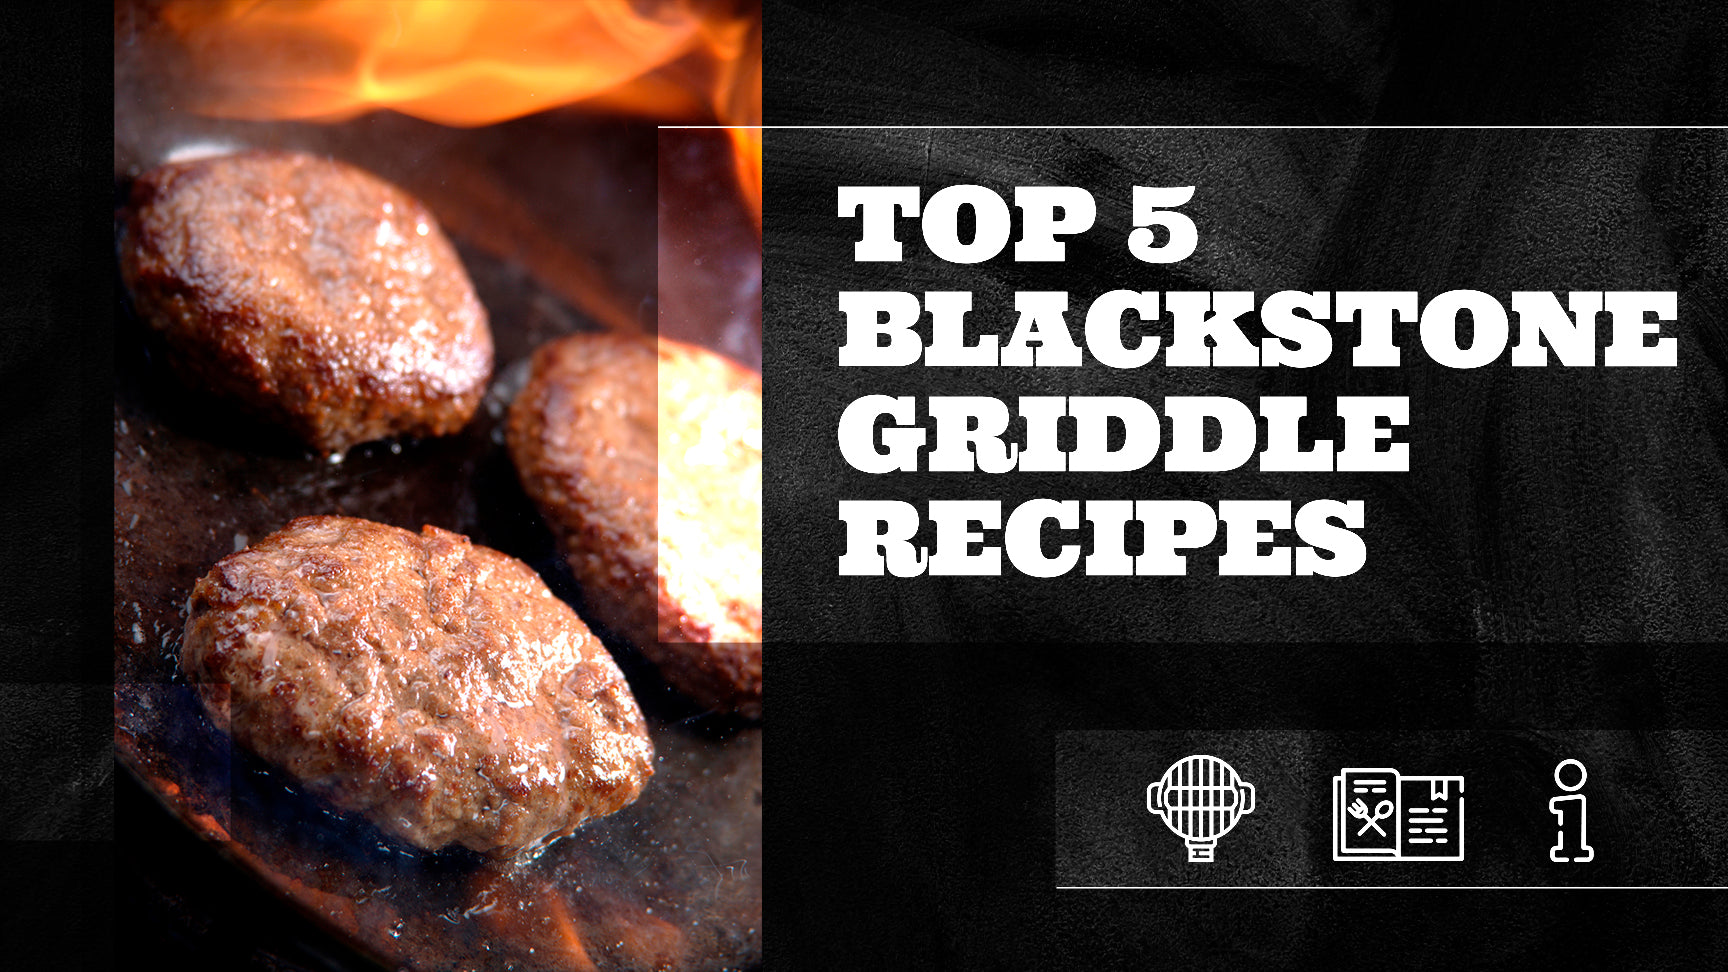 The Blackstone Griddle - An Ultimate Guide for Griddle Beginners